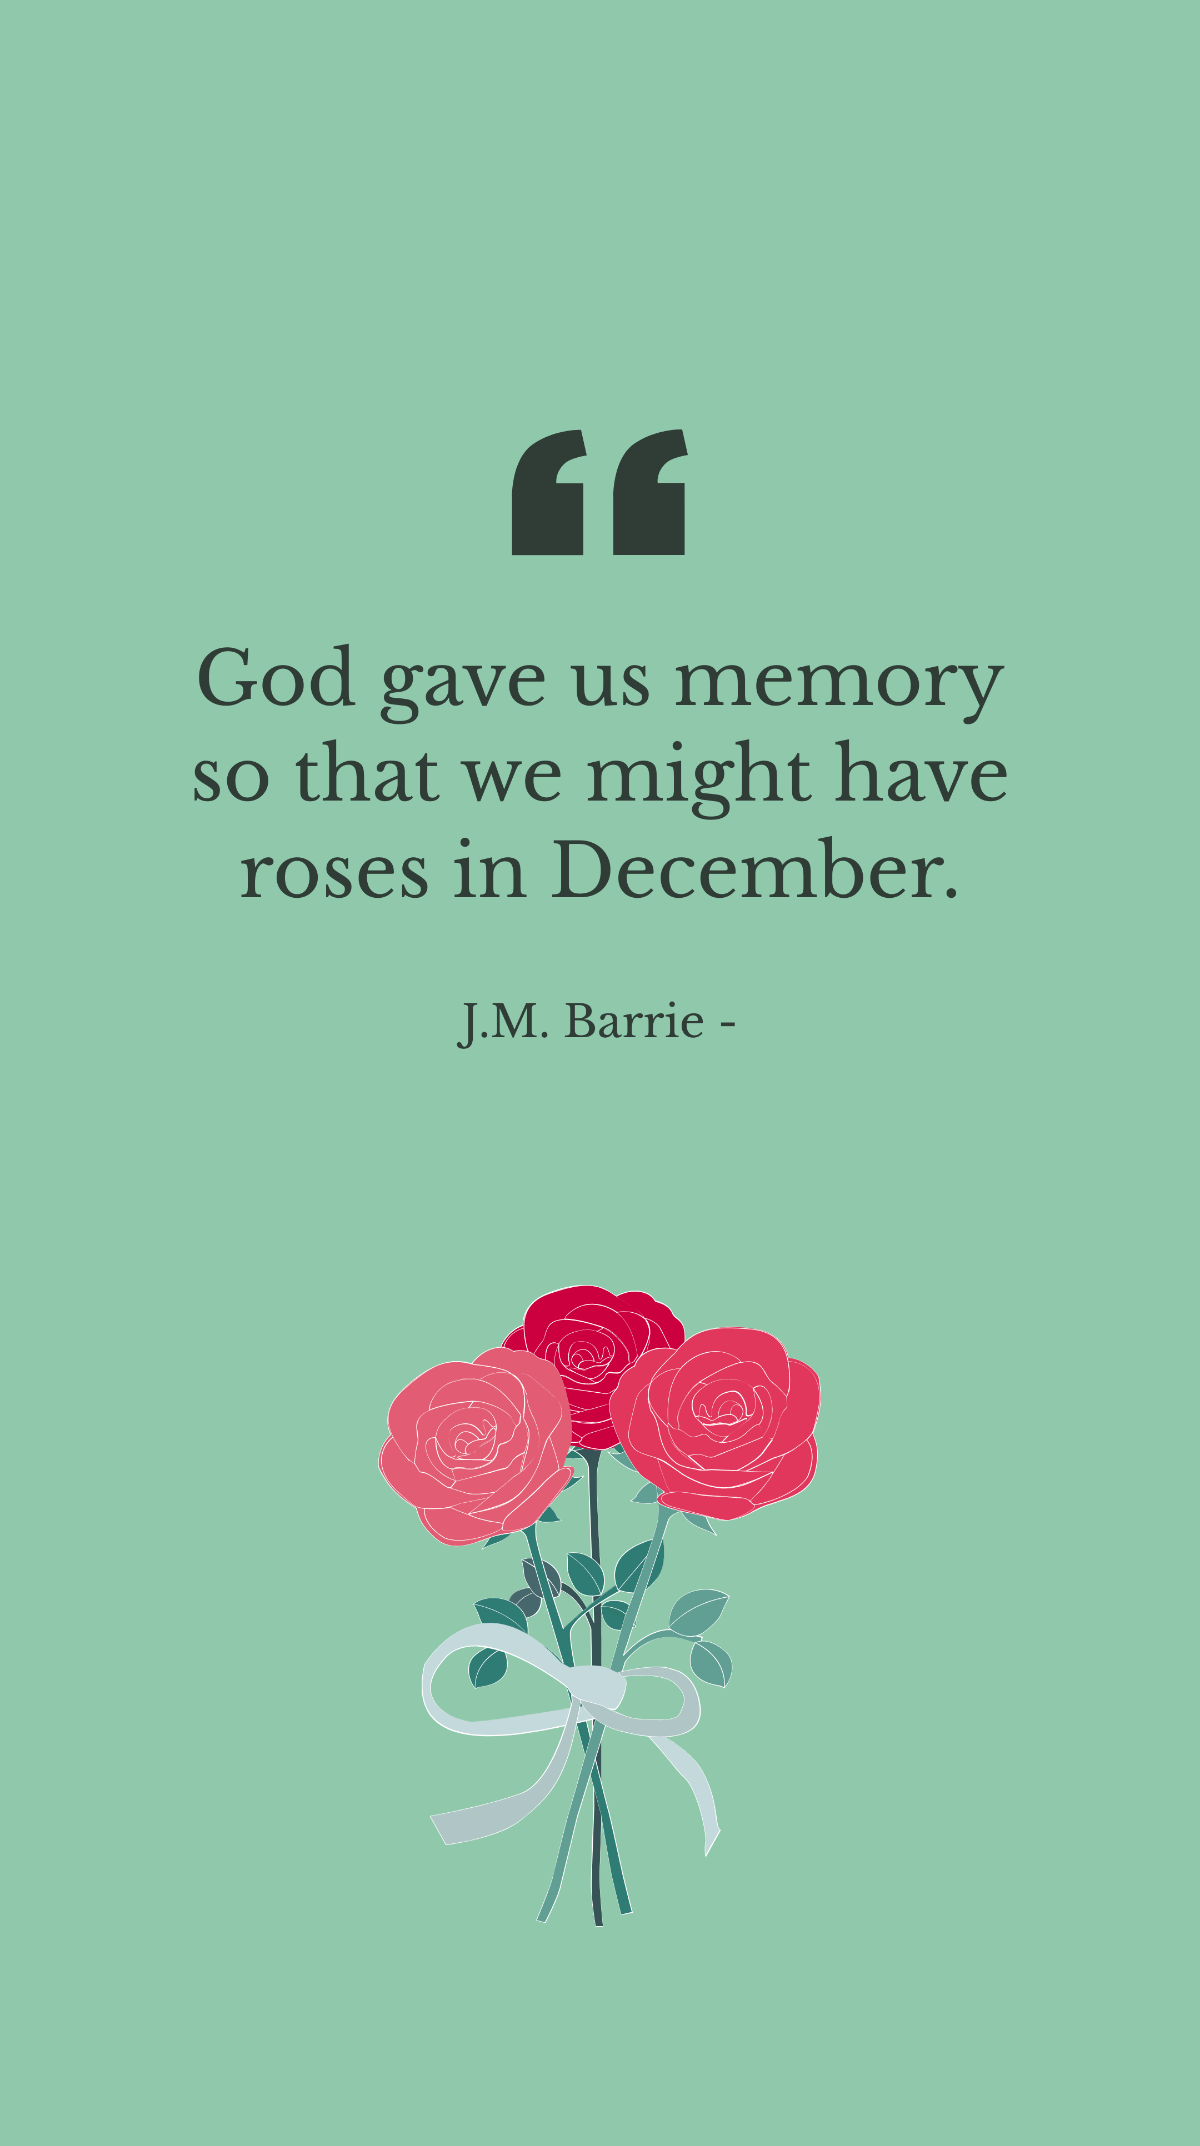 J.M. Barrie - God gave us memory so that we might have roses in December. Template